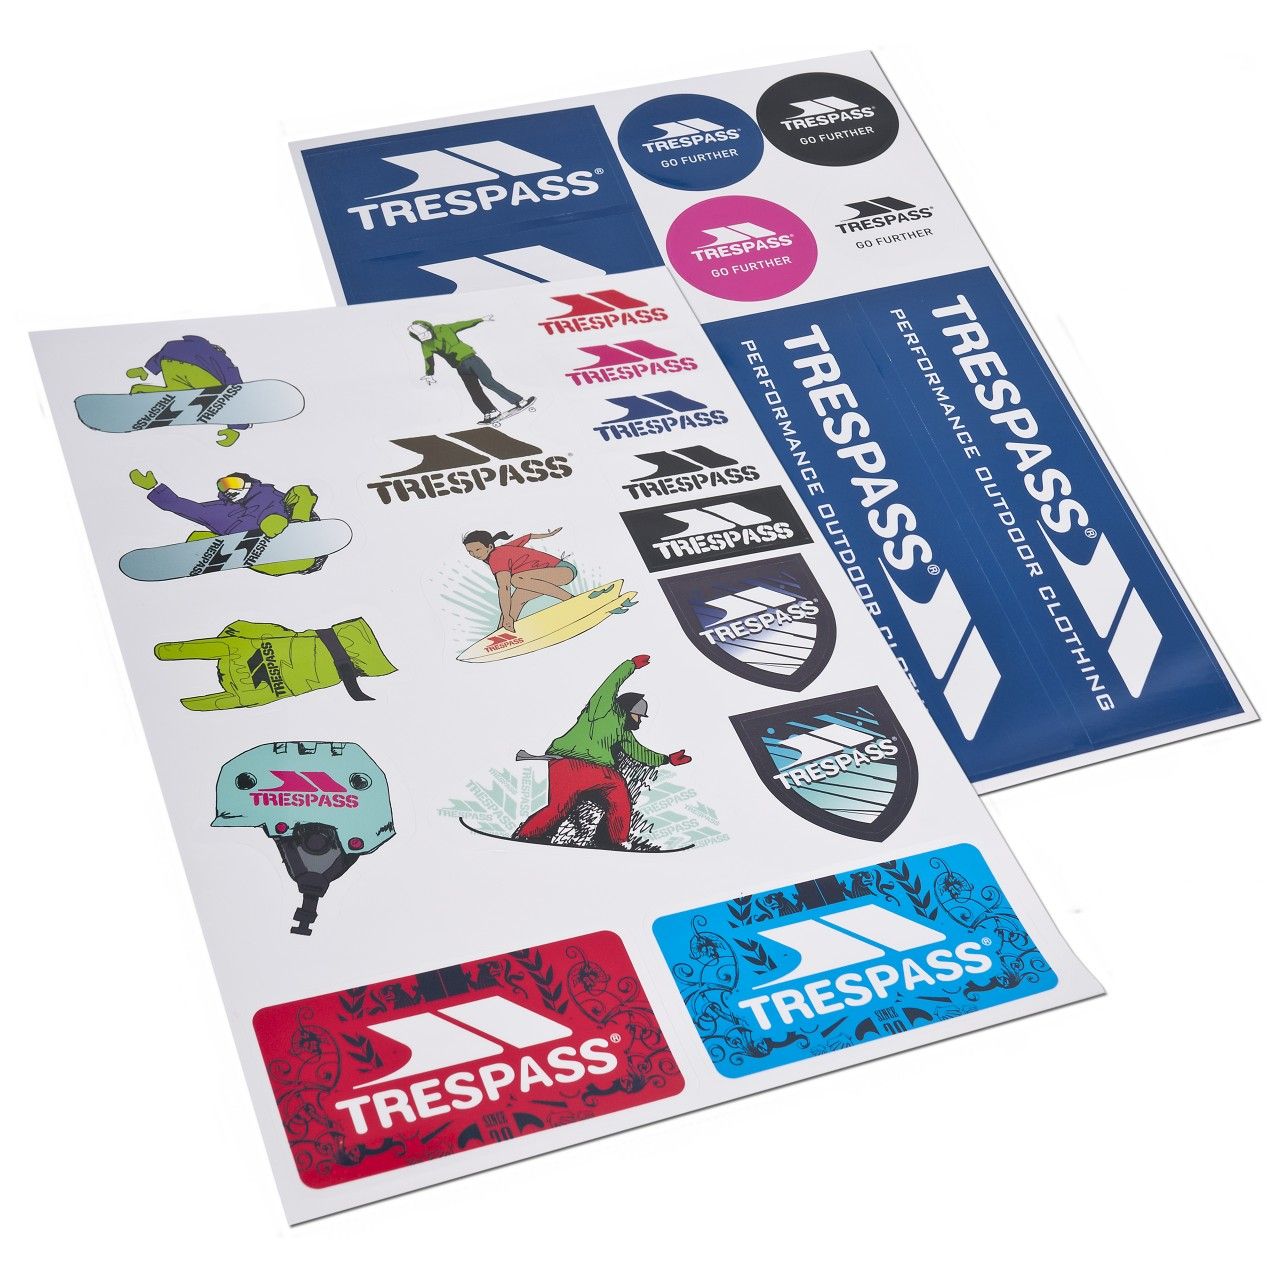 High quality PVC sticker kit. Full colour printed. 2 x A4 sheets with die cut. Durable and waterproof for outdoor applications.